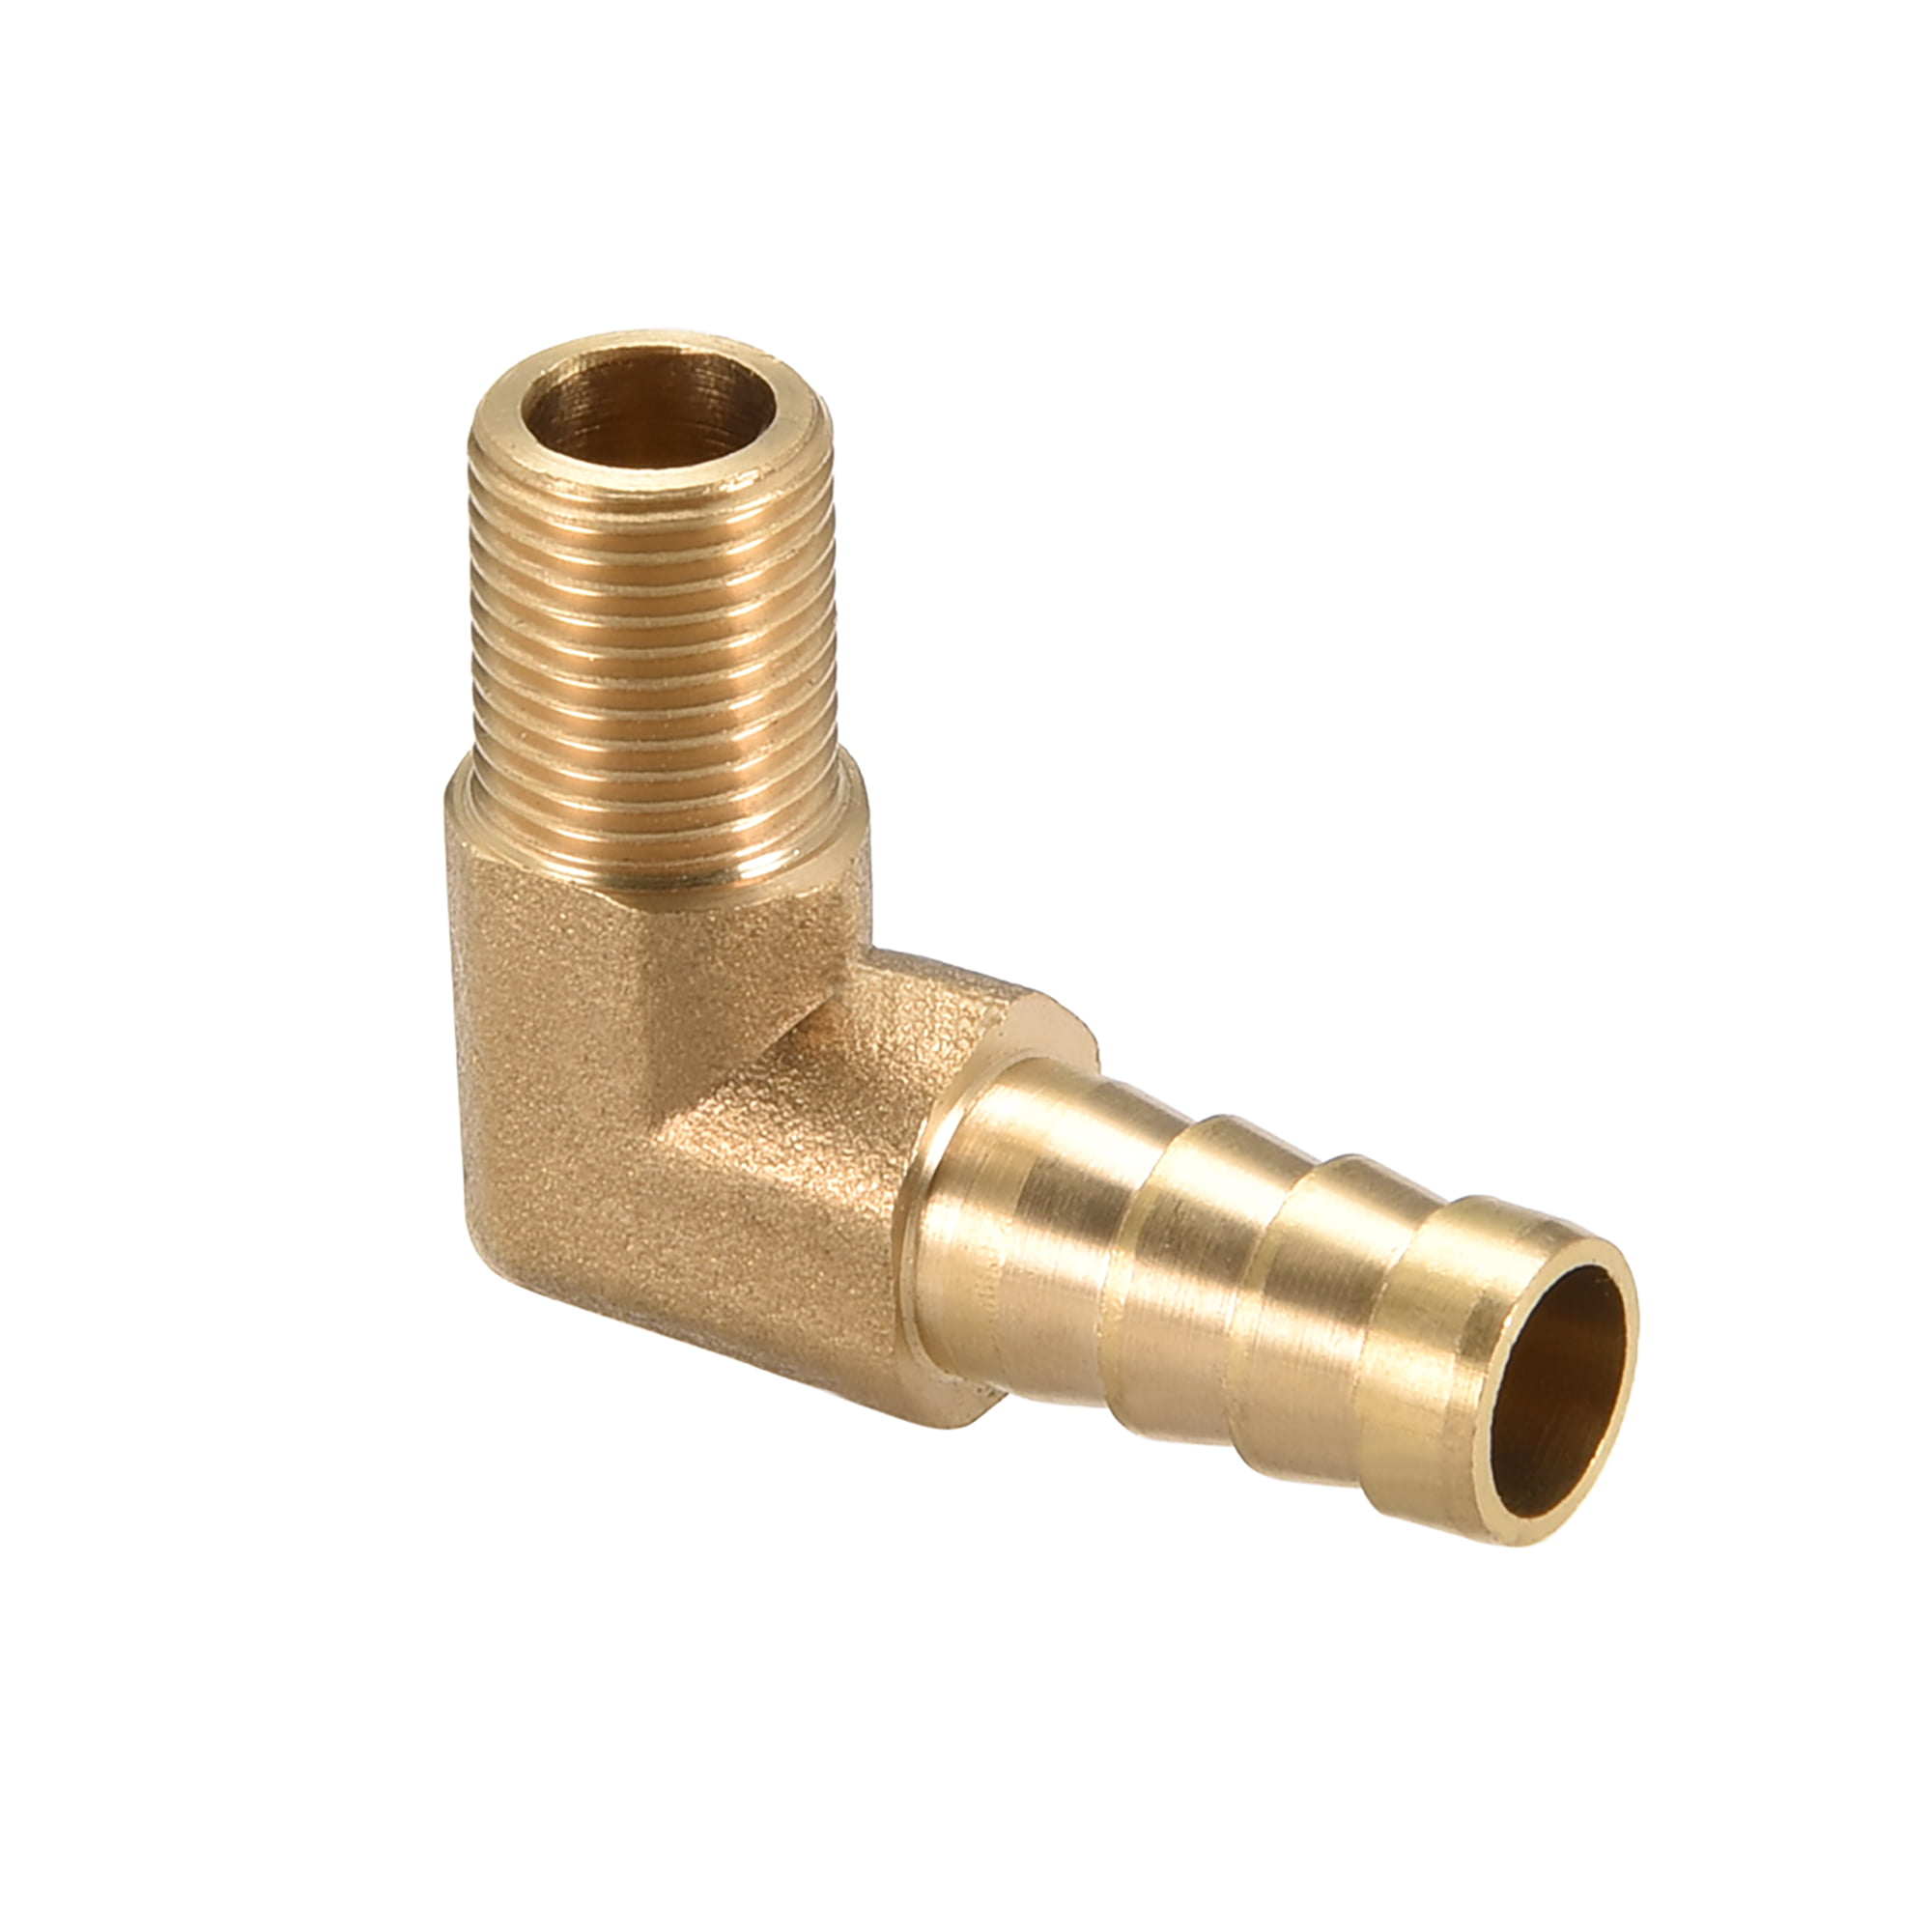 1/8"NPT Male Barbed Hose/Tubing Fitting 90 Degree Elbow Connector Brass 